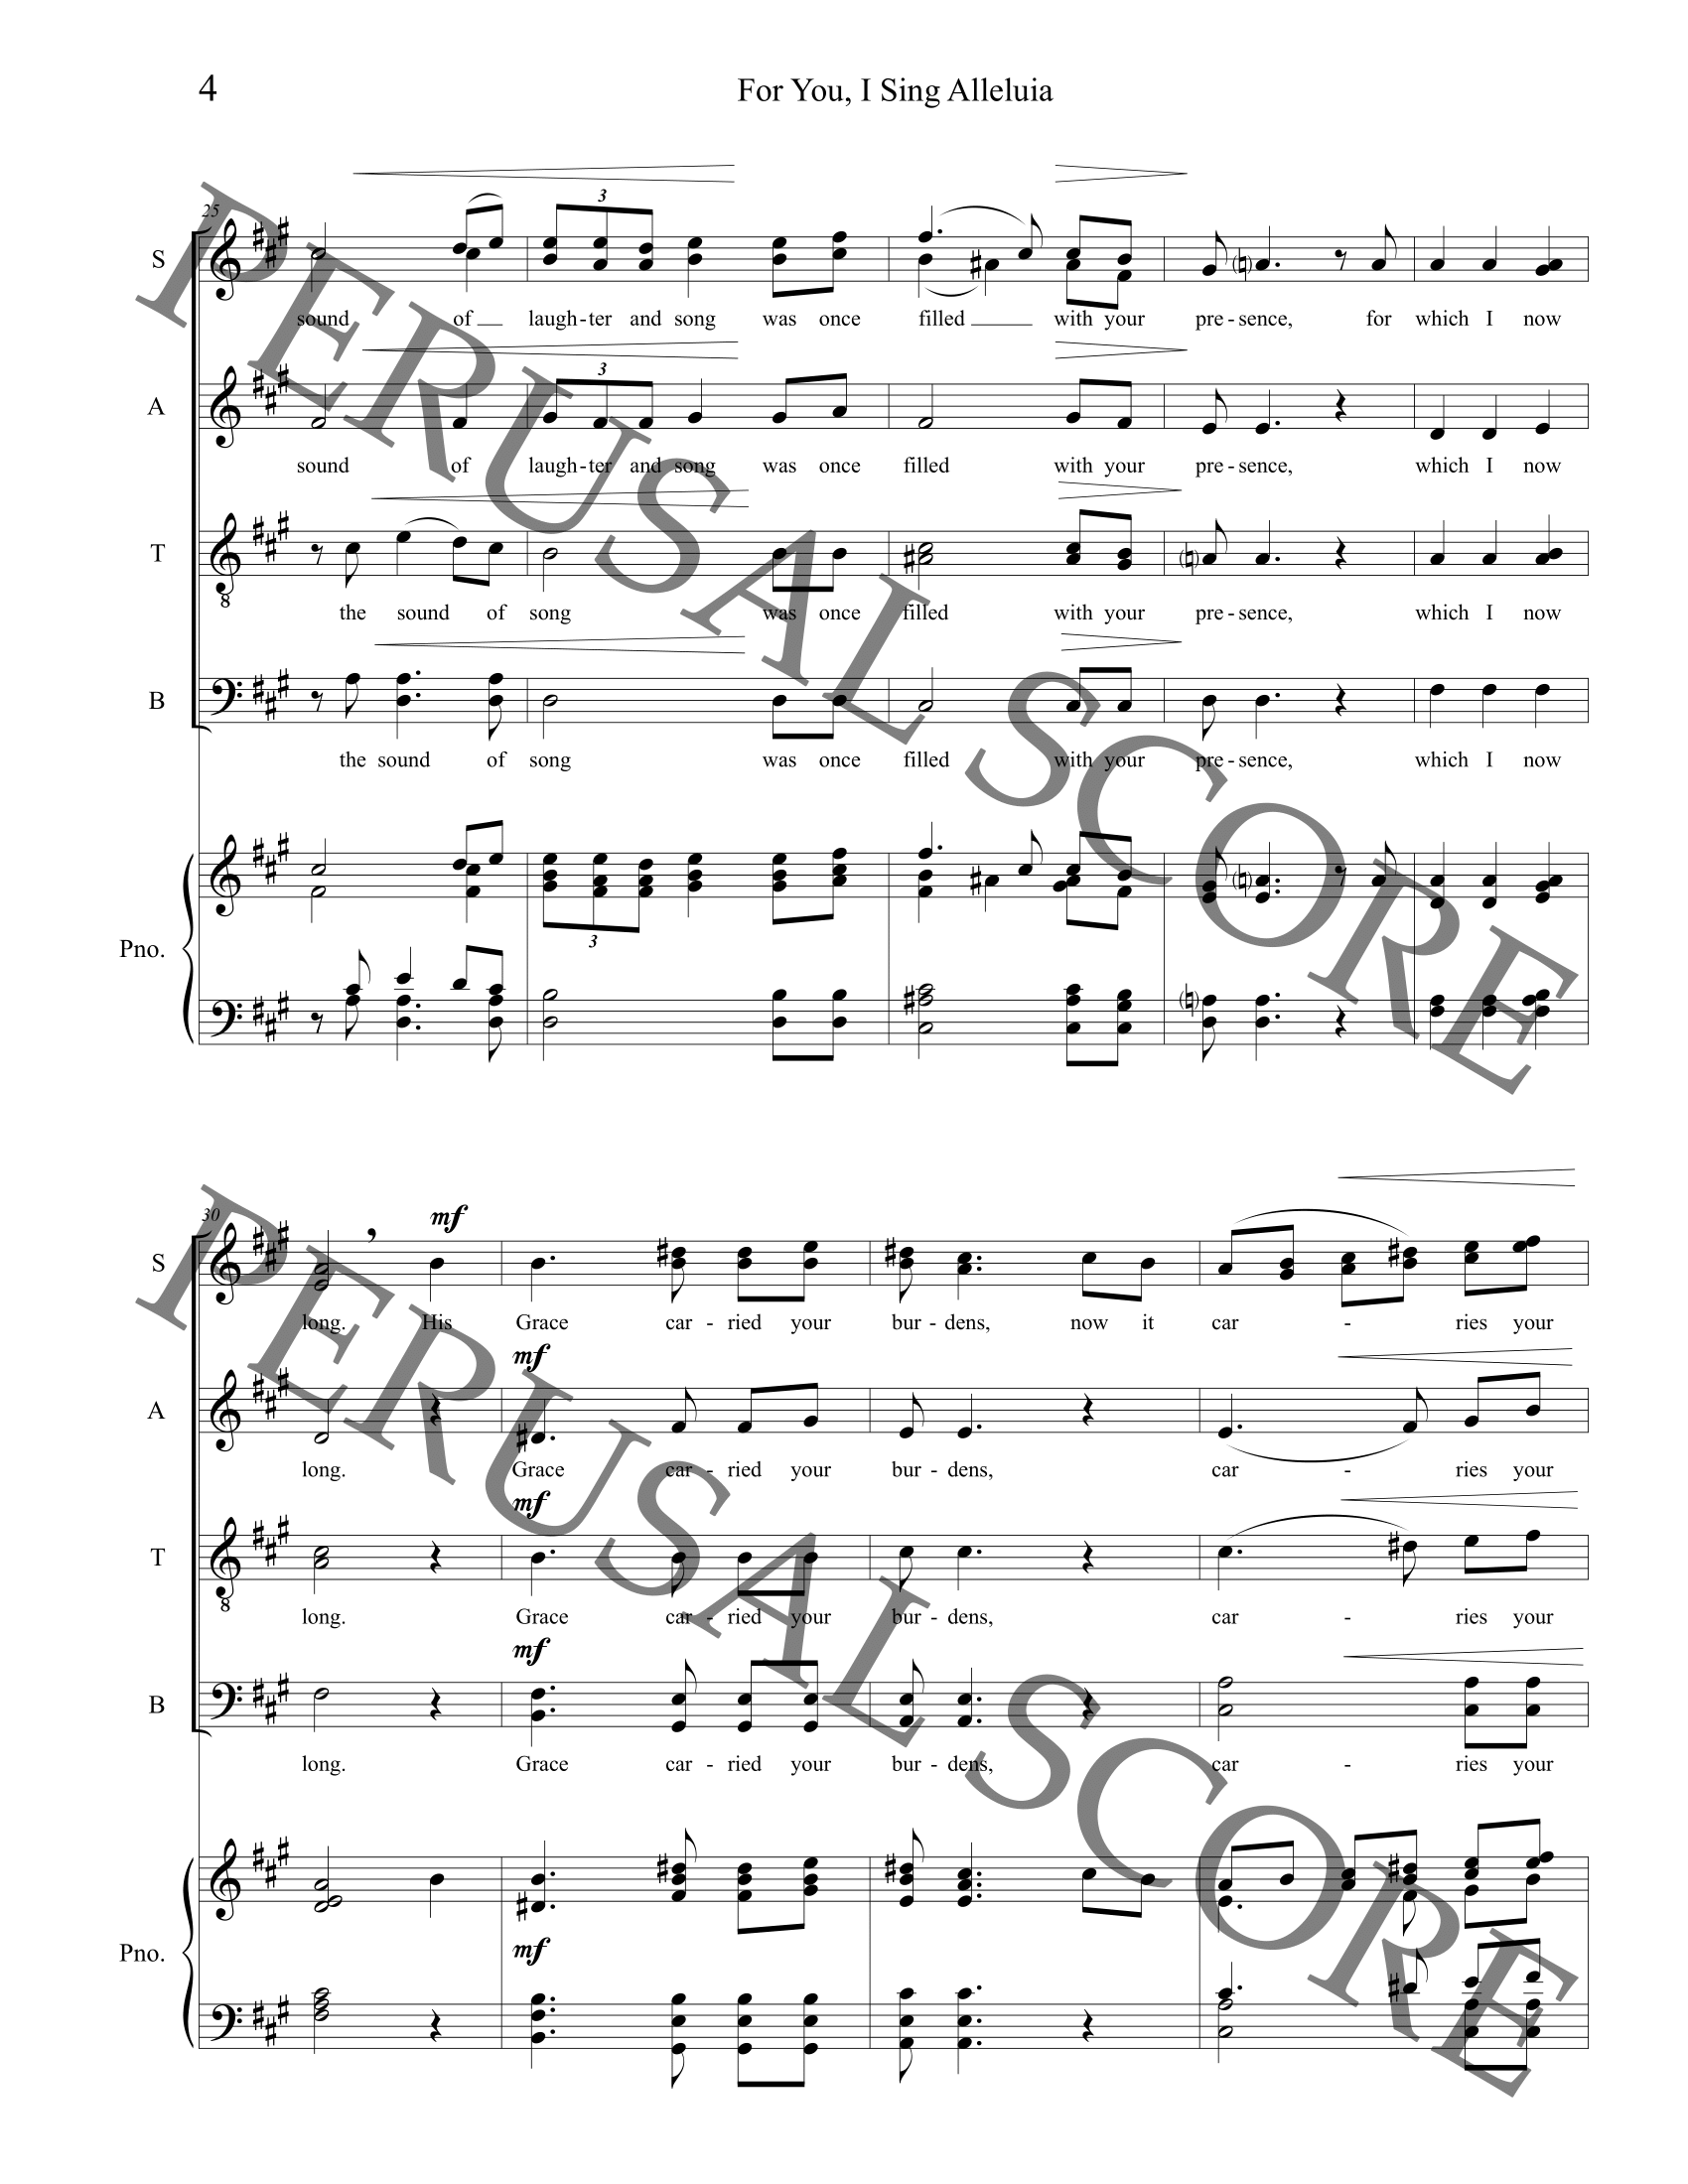 For You, I Sing Alleluia (SATB)